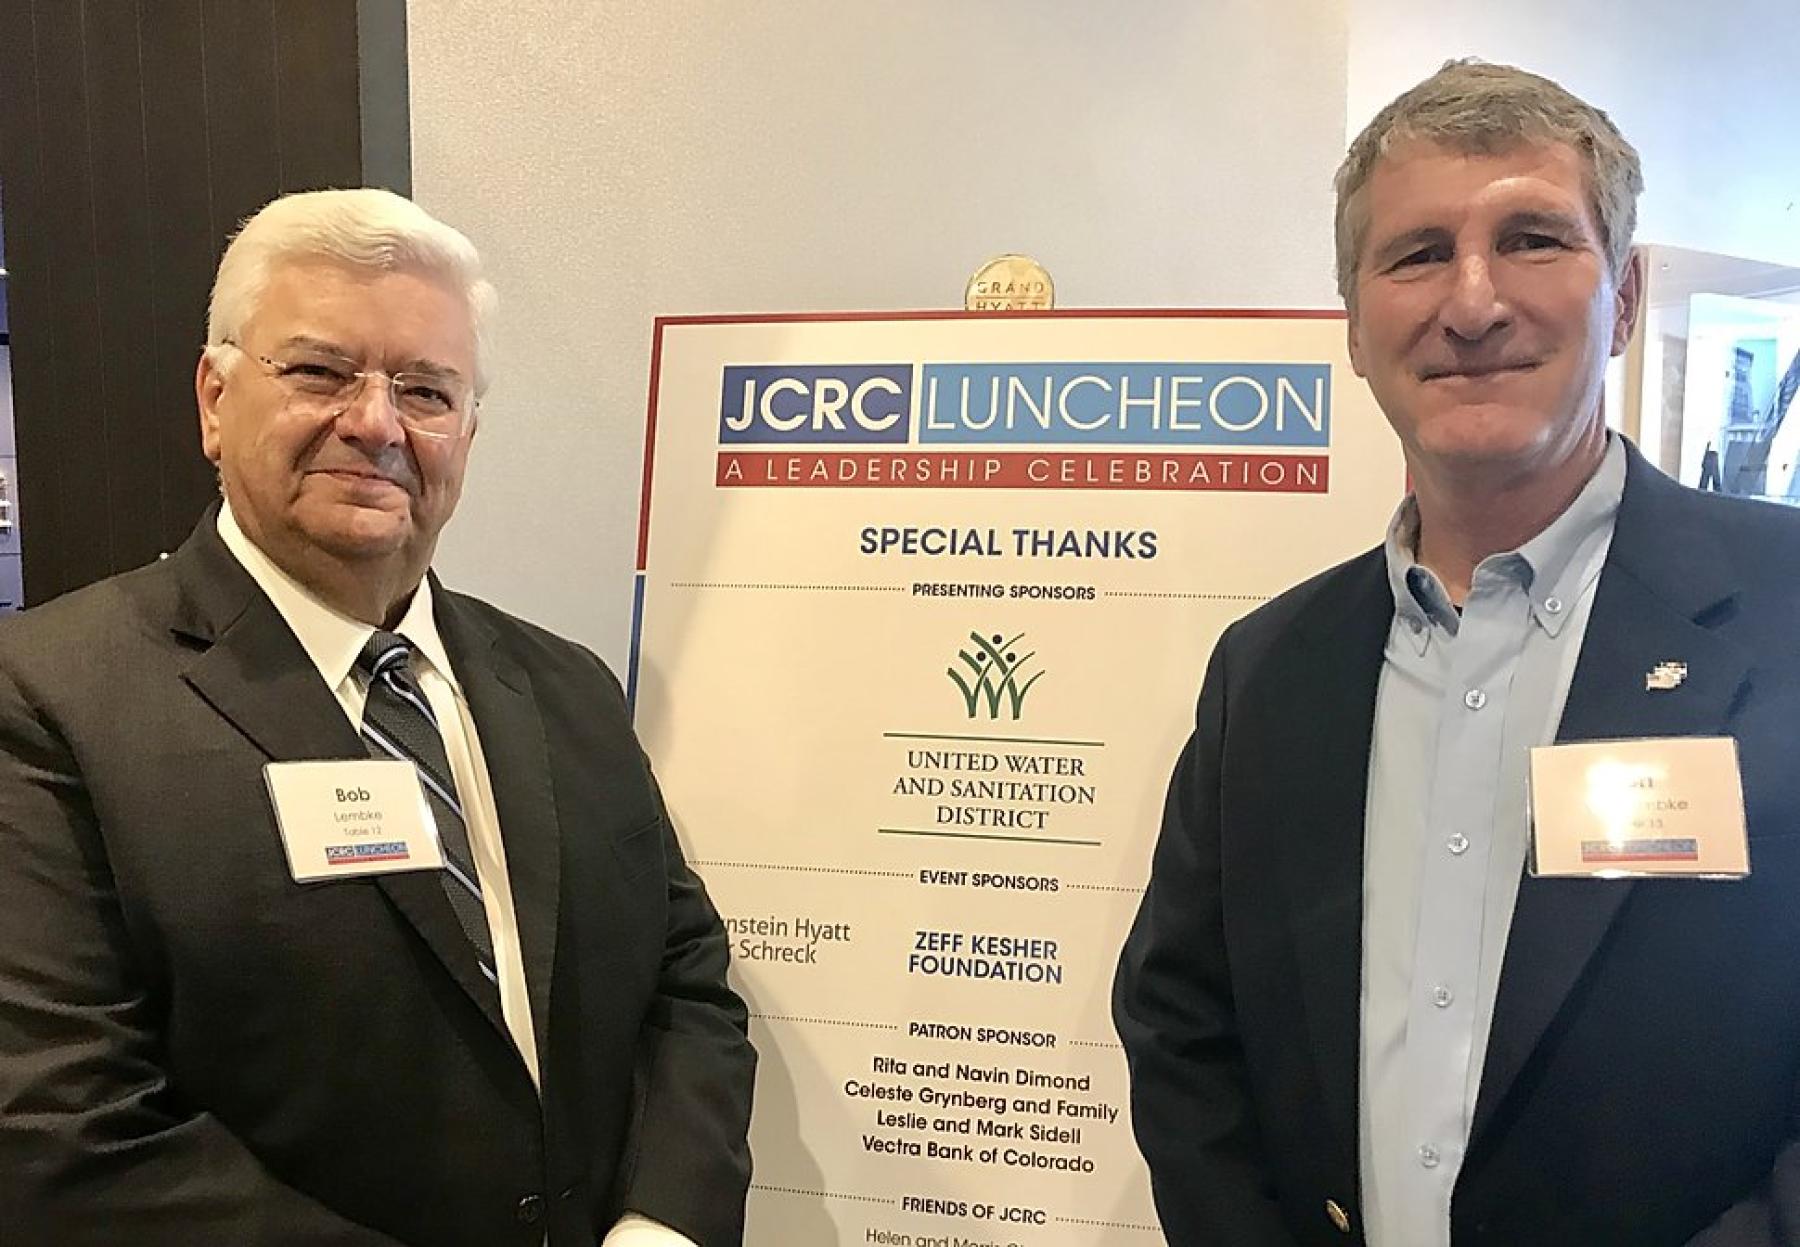 Bob Lembke, President of United Water and Sanitation District, and Ron vonLembke, Chief of Staff of United Water, pose in front of the JCRC Sponsorship Recognition Banner. United Water and Sanitation District and Bob Lembke, personally, helped sponsor the luncheon. (Photo by Lynn Bartels)